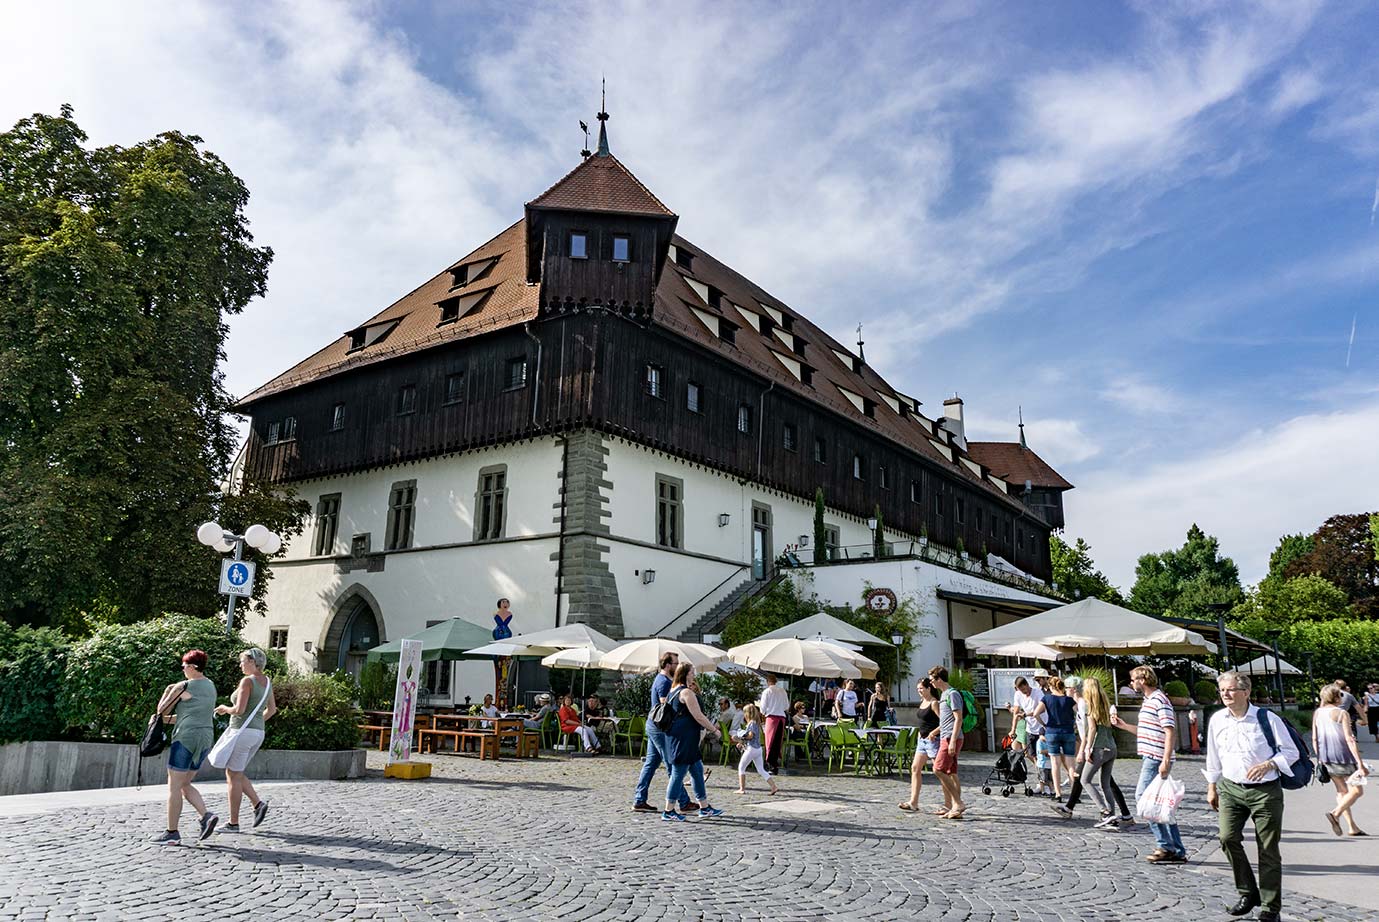 A medieval building in Konstanz, Germany that is half wood and half plaster. There are tables and umbrellas outside of the building.